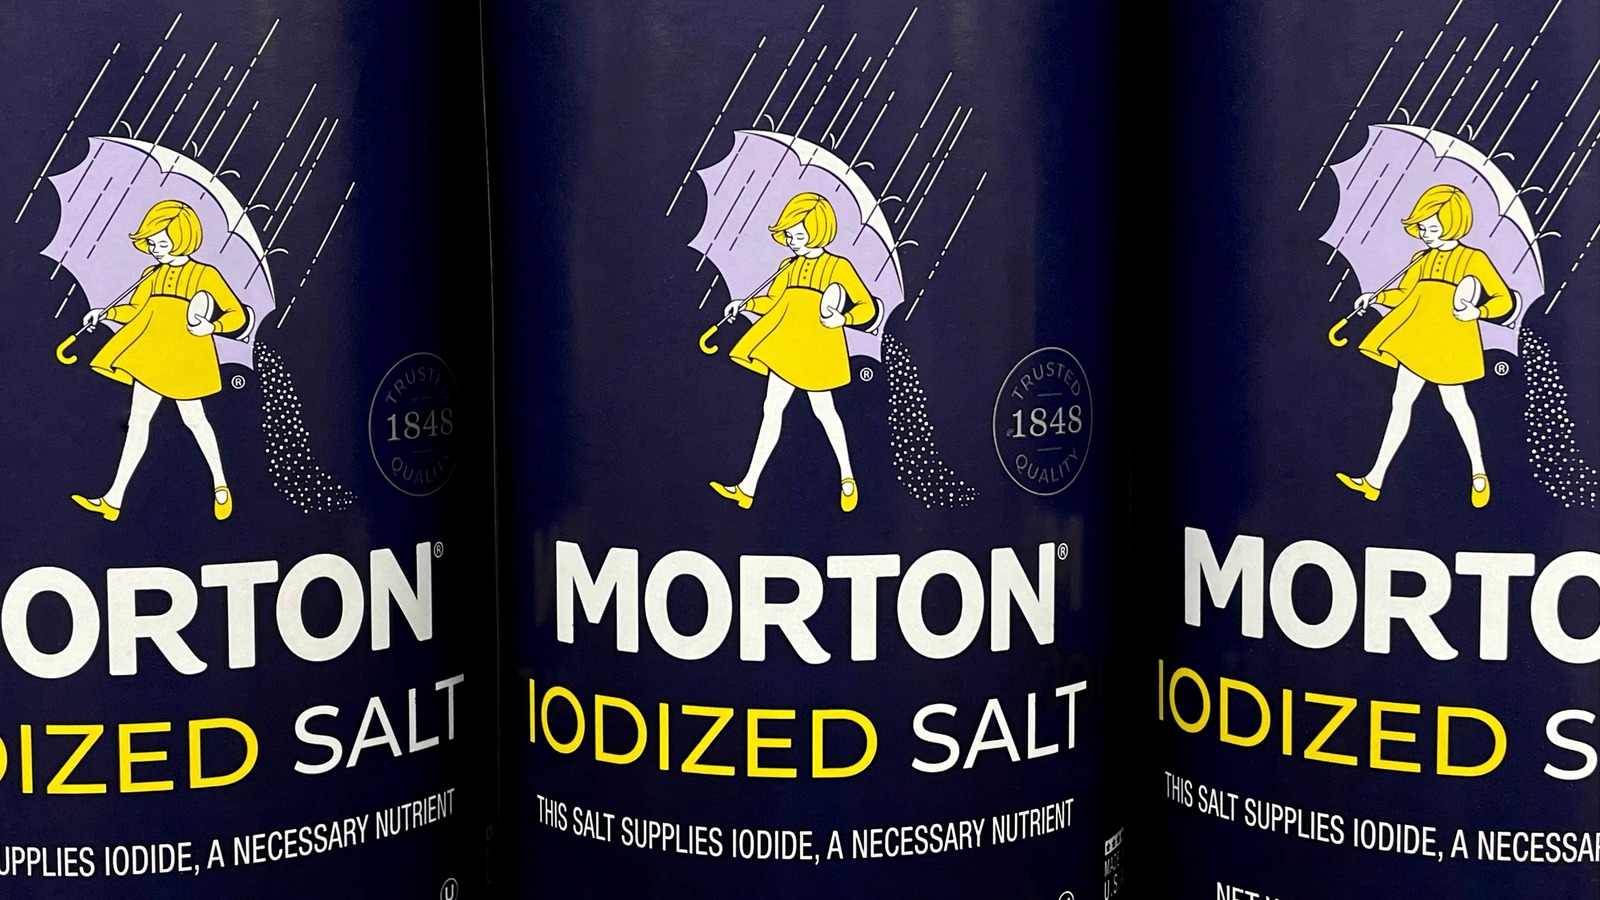  Unrefined Vs. Refined Salt: Is There A Nutritional Difference? 